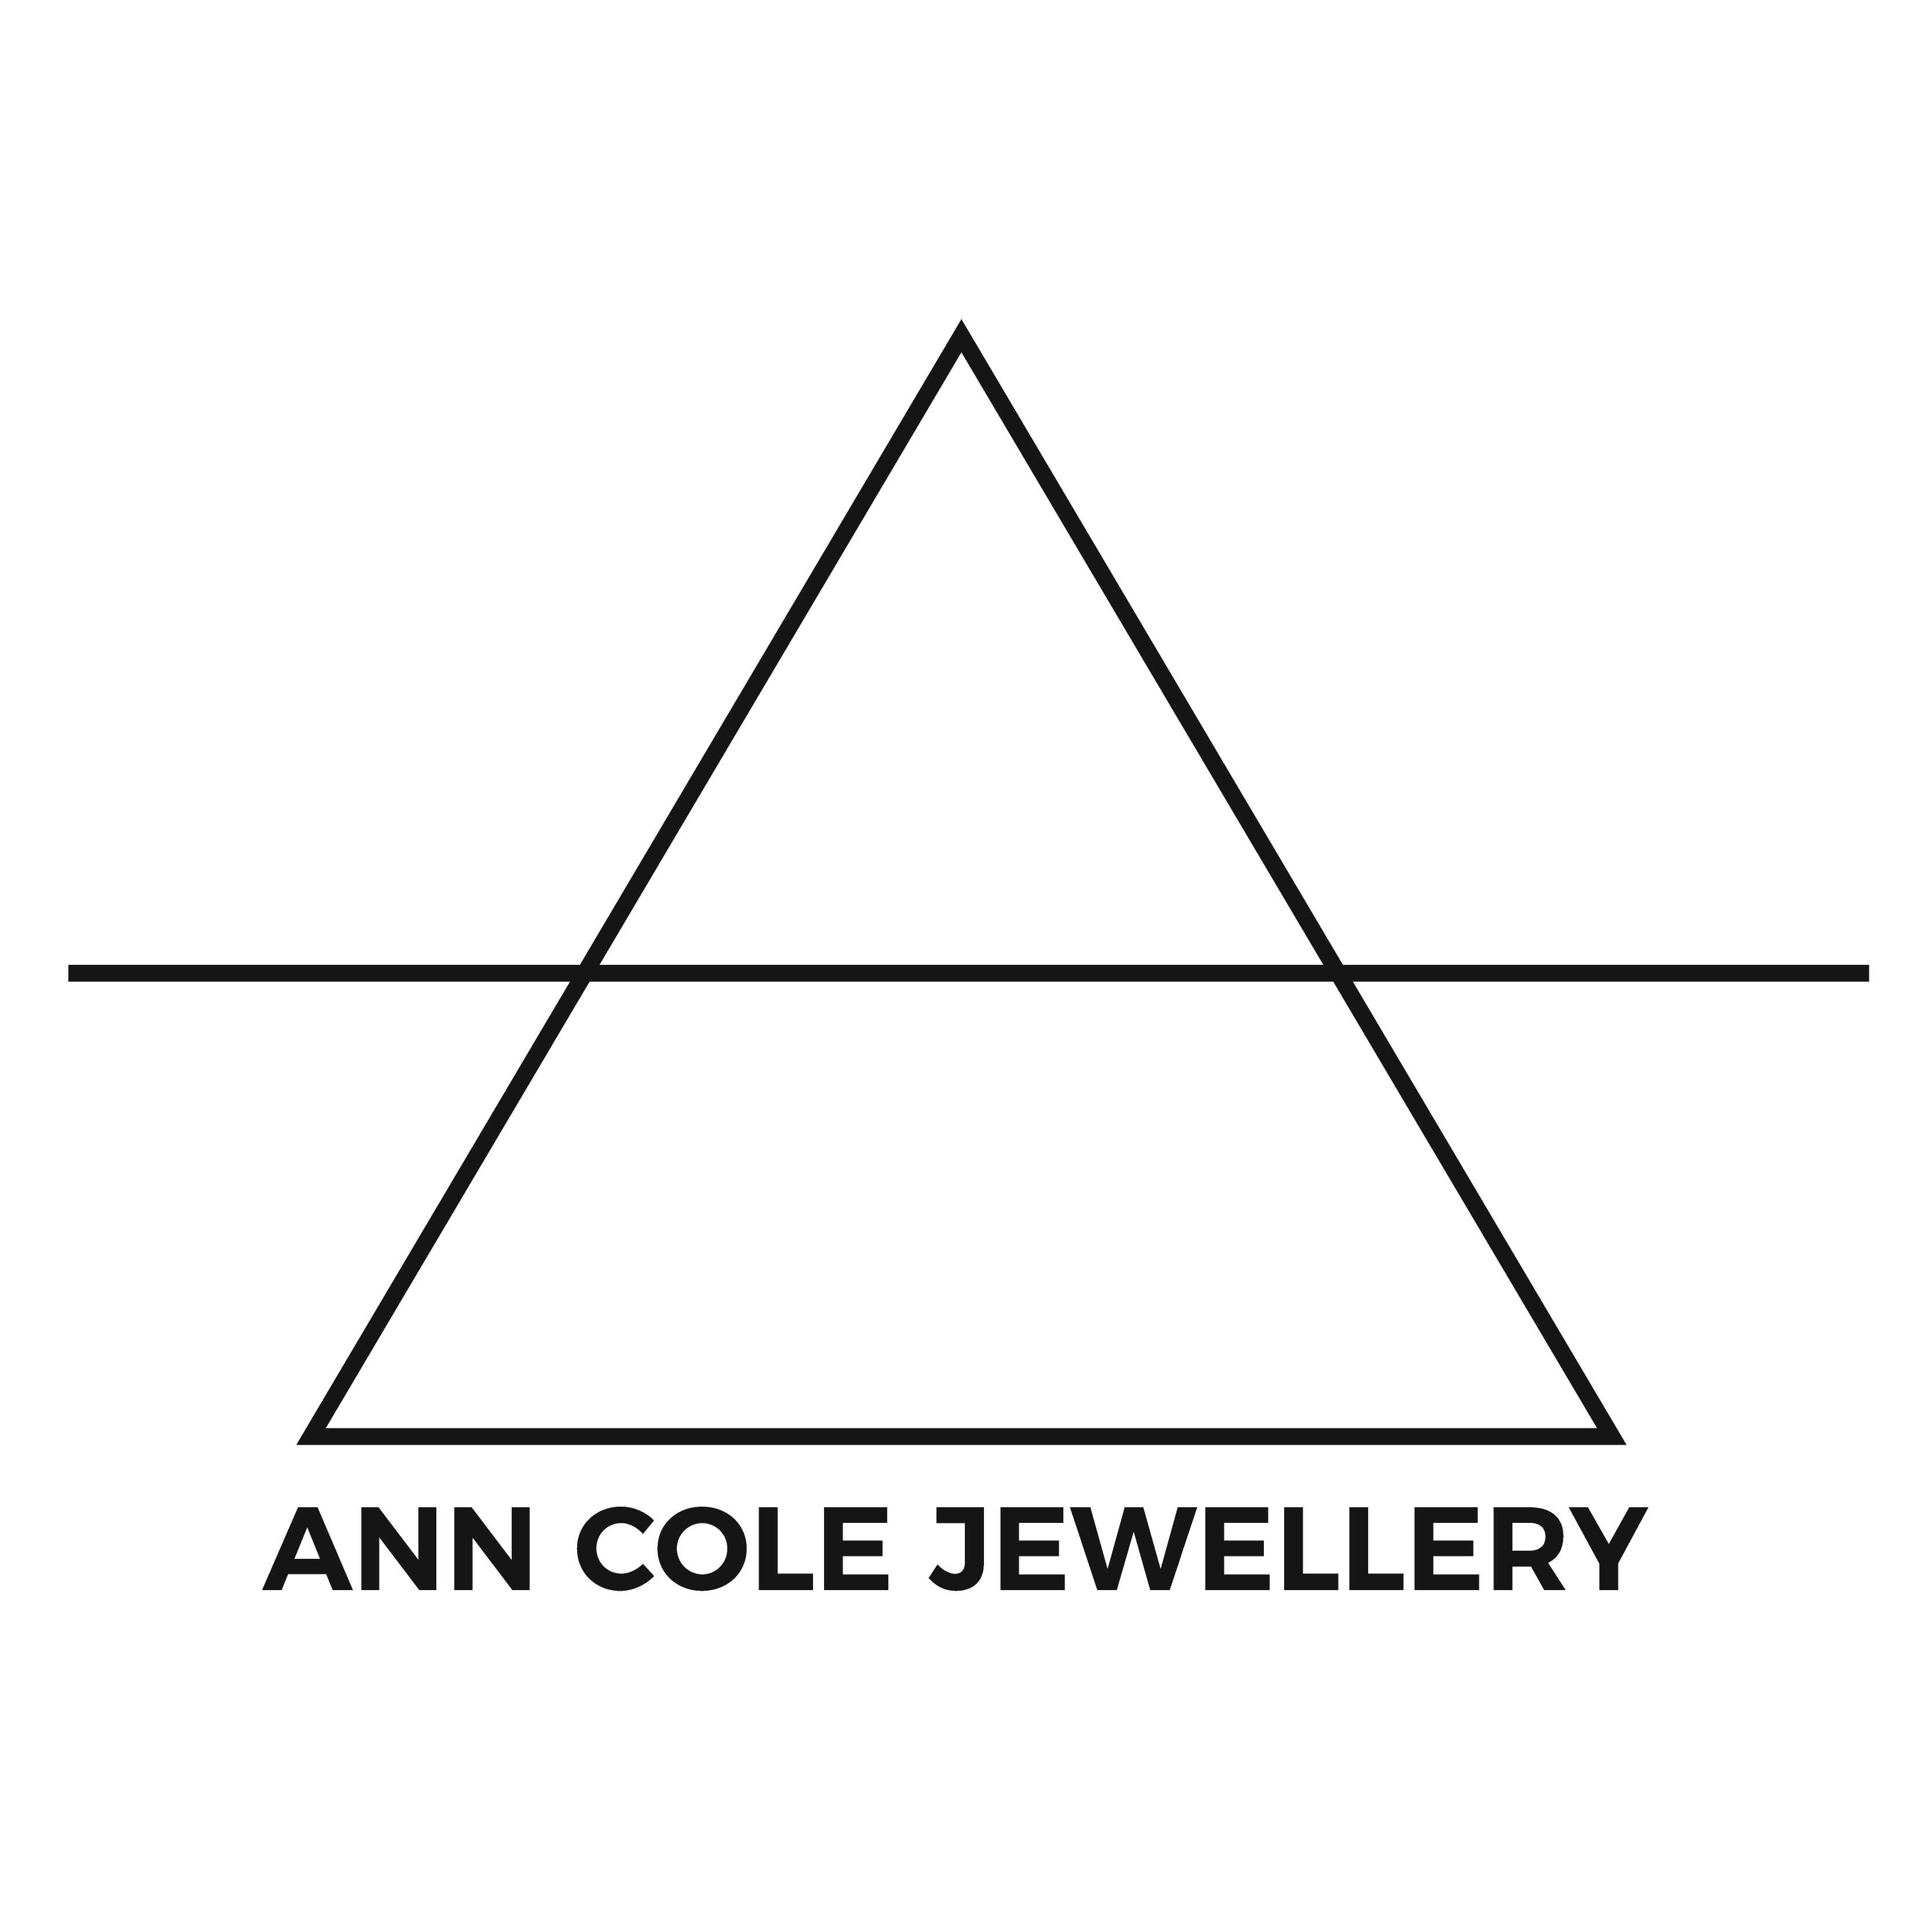 AnnColeJewellery